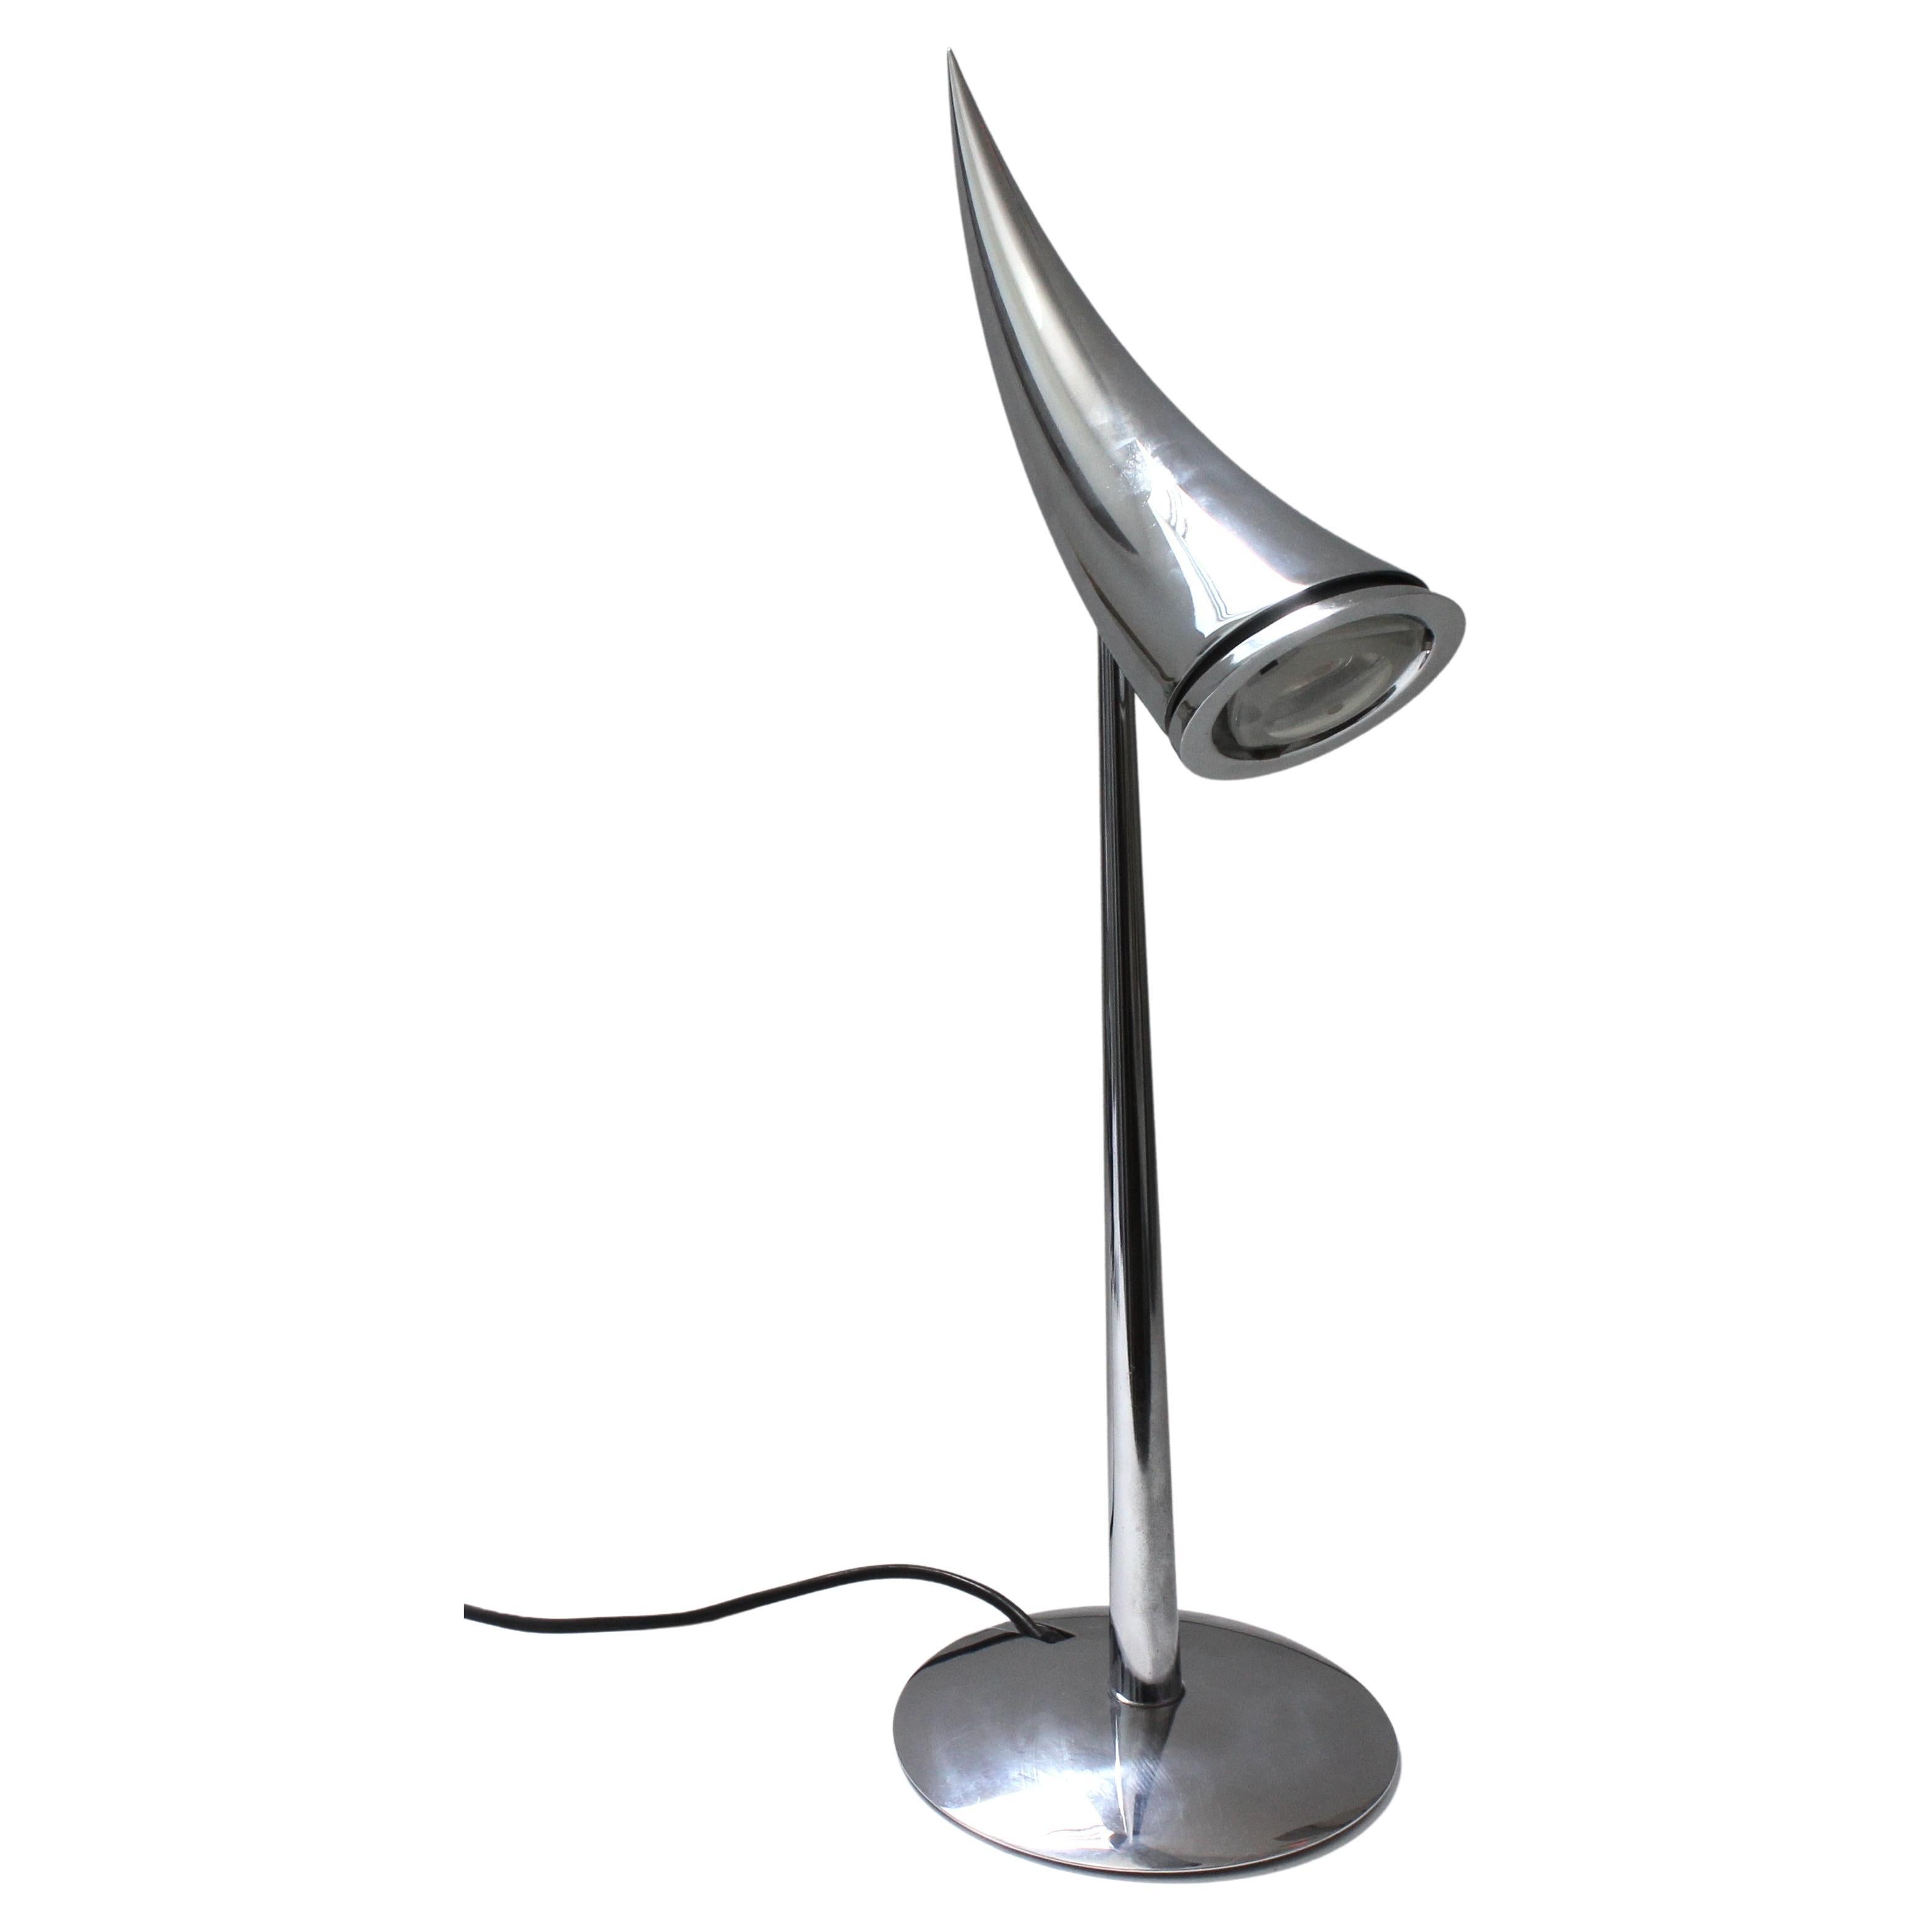 This stylish, polished steel table lamp is known as the Ara, and it was created in 1988 by Philippe Starck for Flos.

The lead image shows the lamp in its off position (with the tip of the cornucopia downward) and you need to grab the horn and